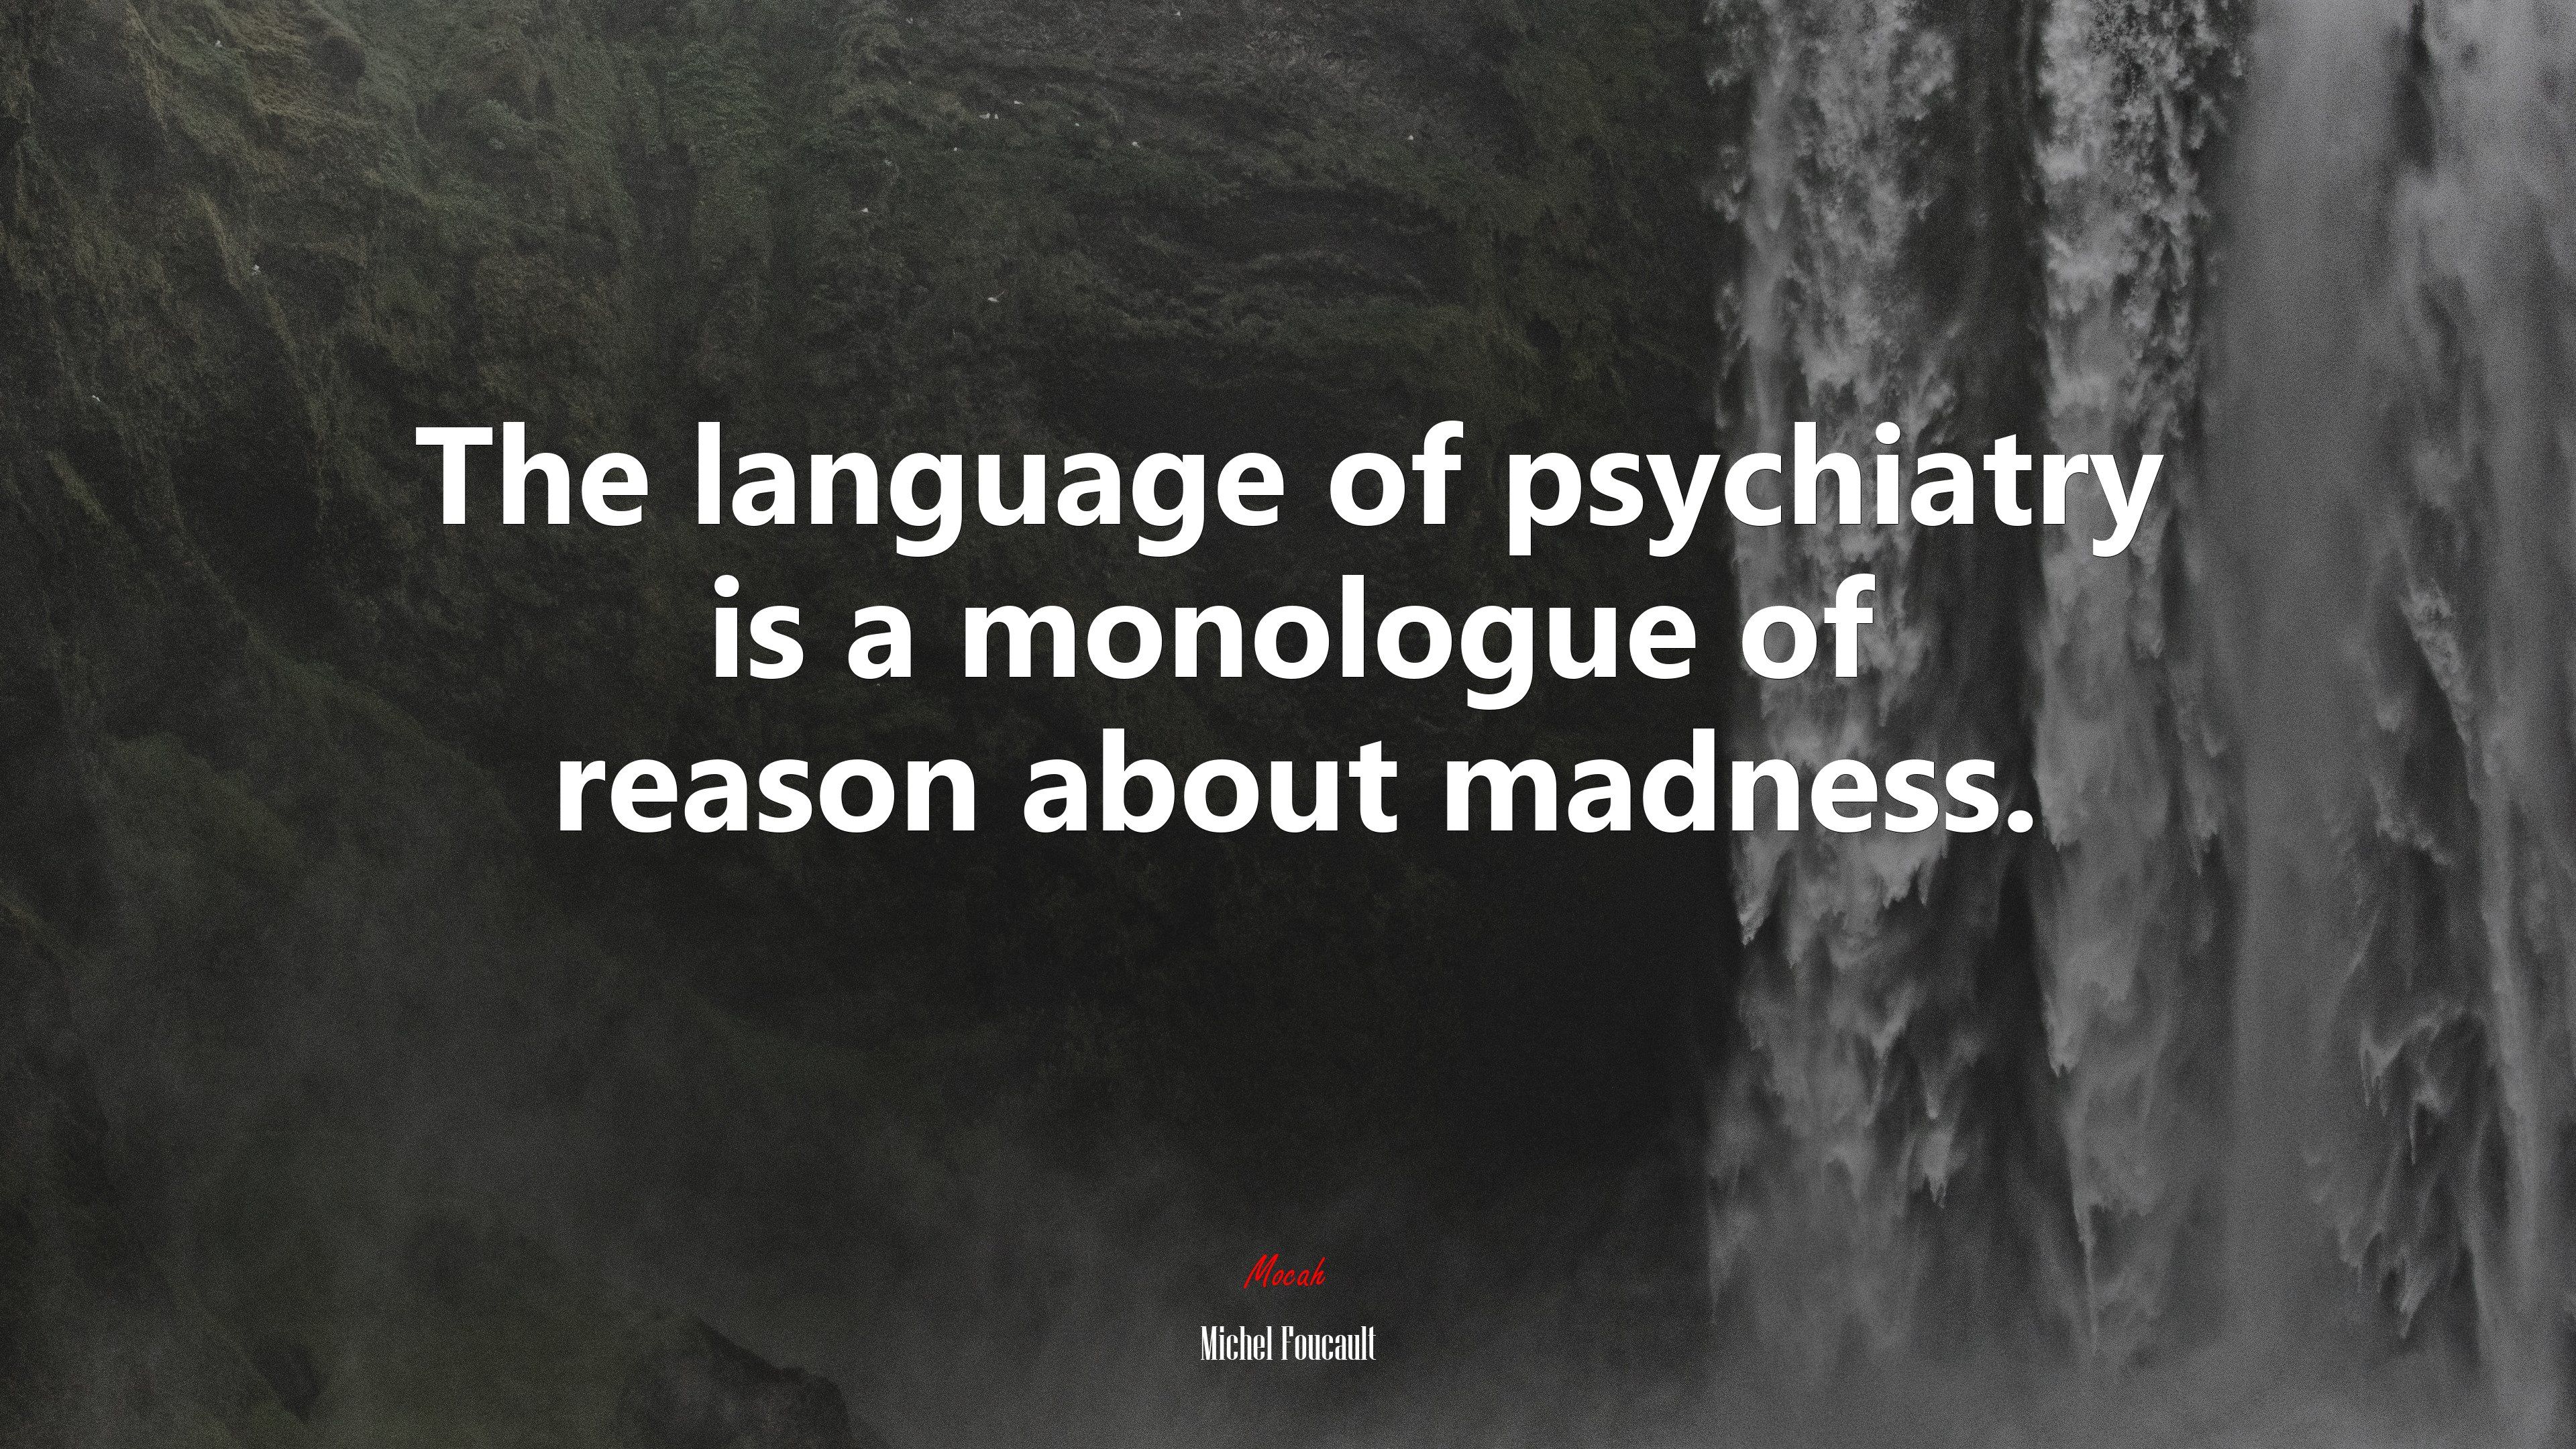 The language of psychiatry is a monologue of reason about madness. Michel Foucault quote, 4k wallpaper. Mocah HD Wallpaper